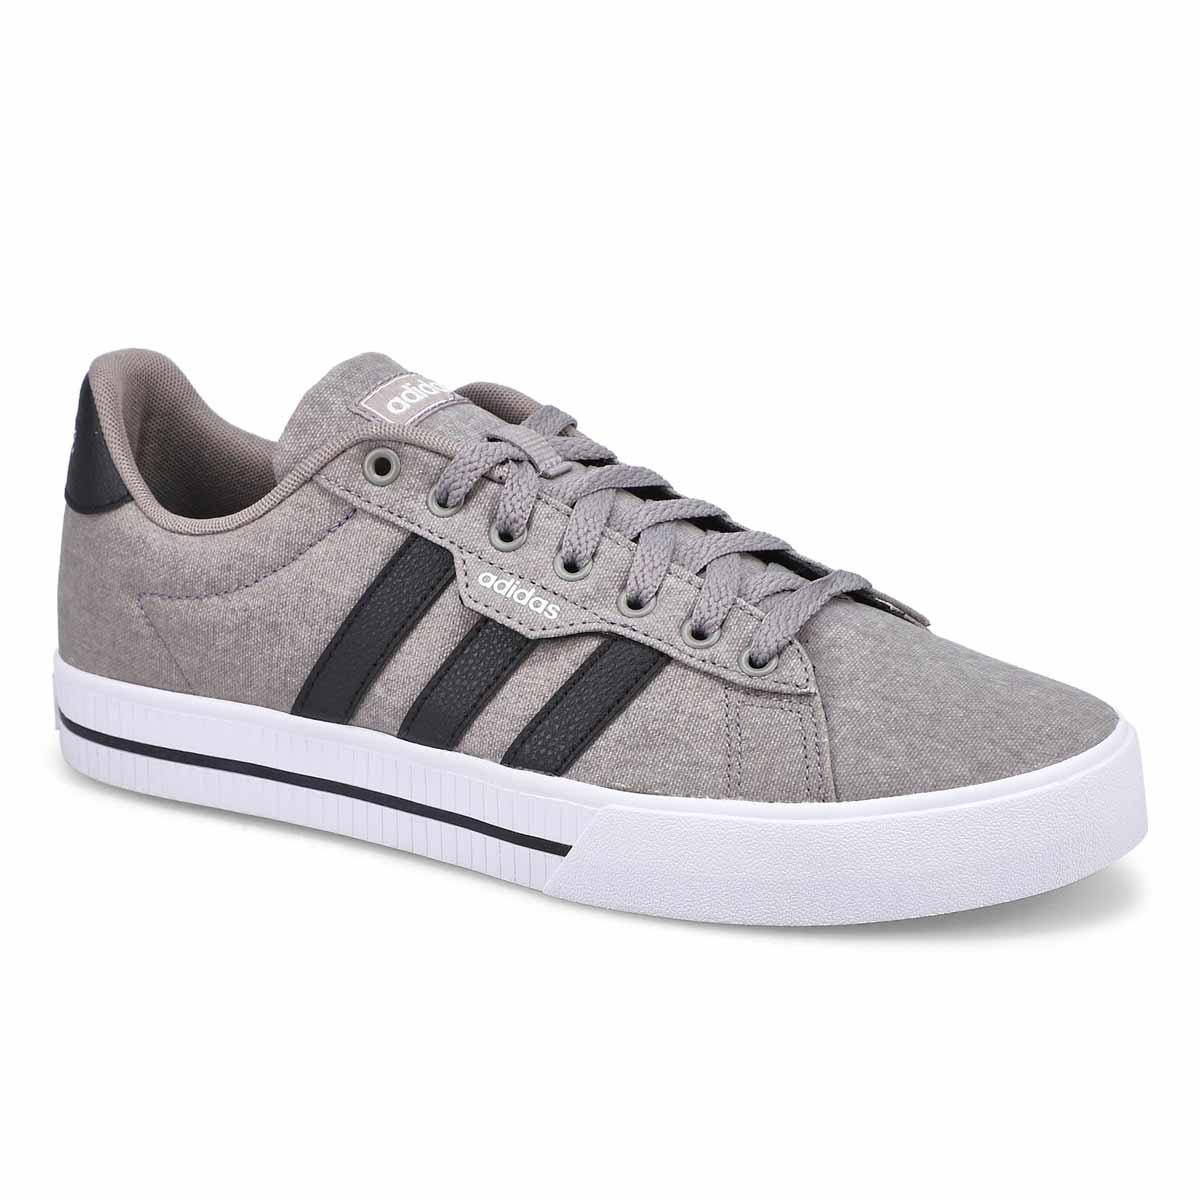 Men's Daily 3.0 Lace Up Sneaker - Grey/Black